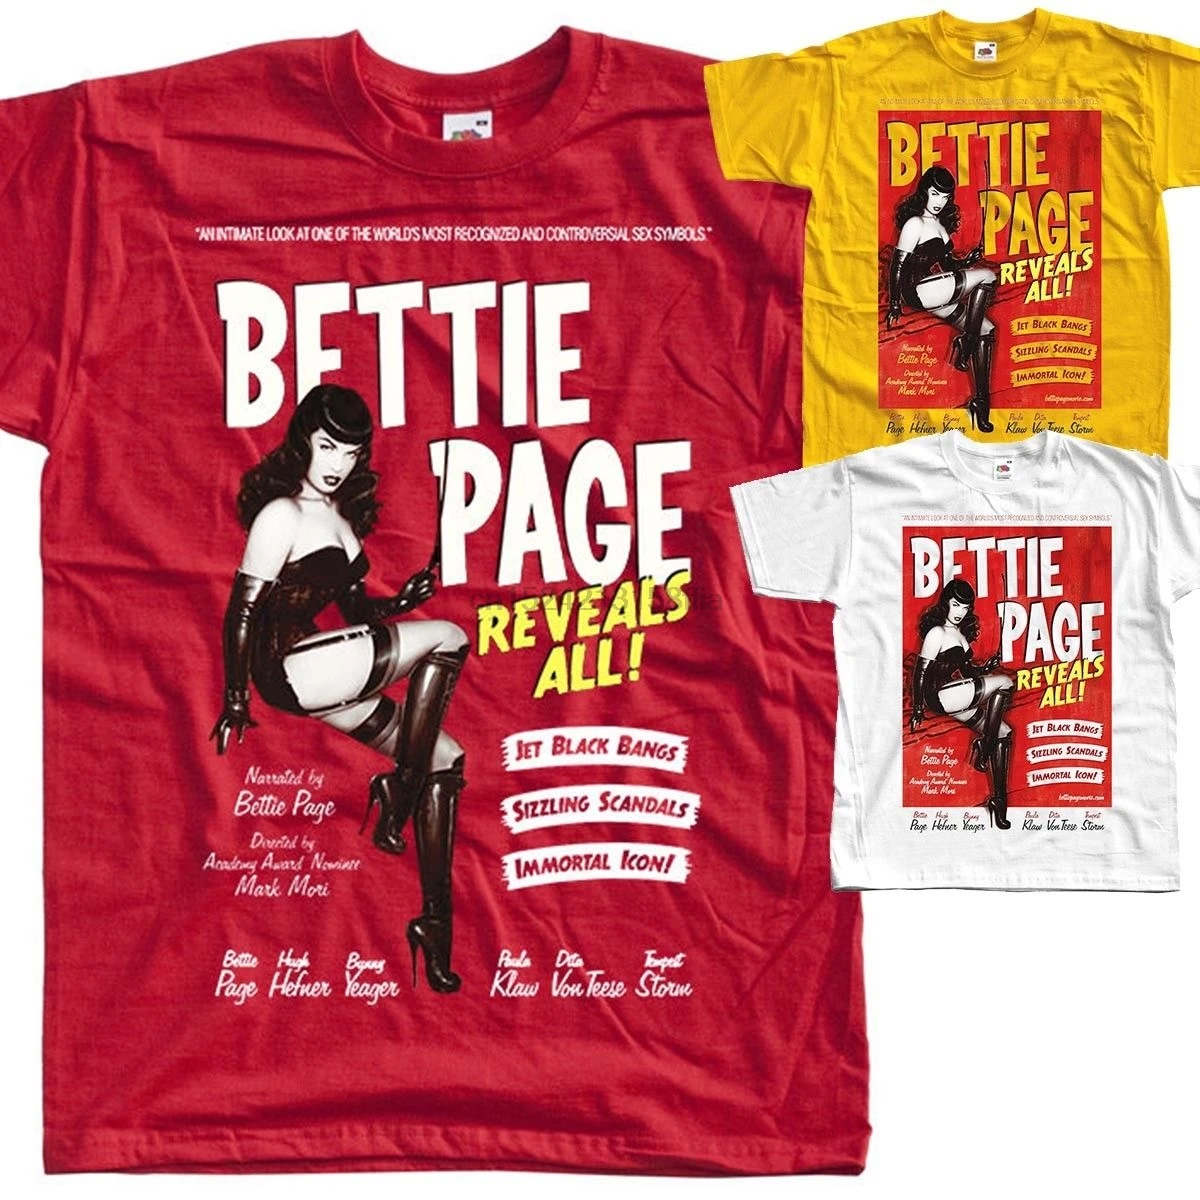 

Bettie Page Reveals All poster T SHIRT all sizes S to 5XL Brand Style Short Sleeve O-Neck T Shirt Men New Men Cotton